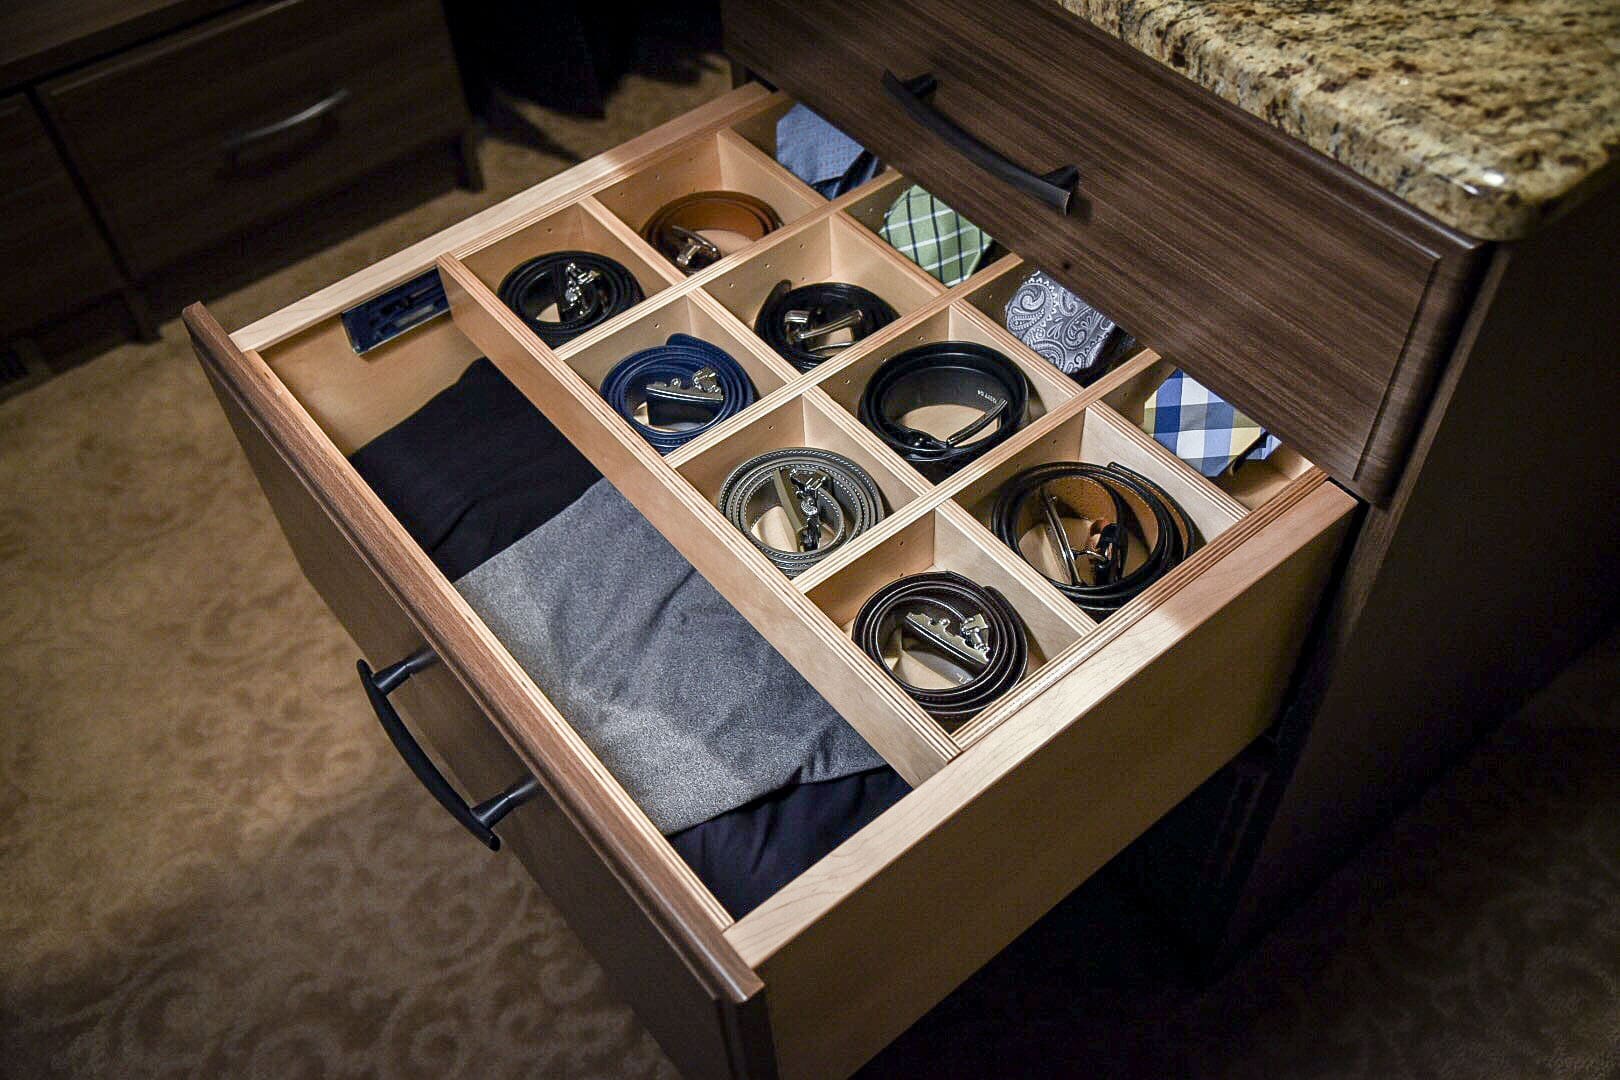 A closeup of a sock and tie drawer